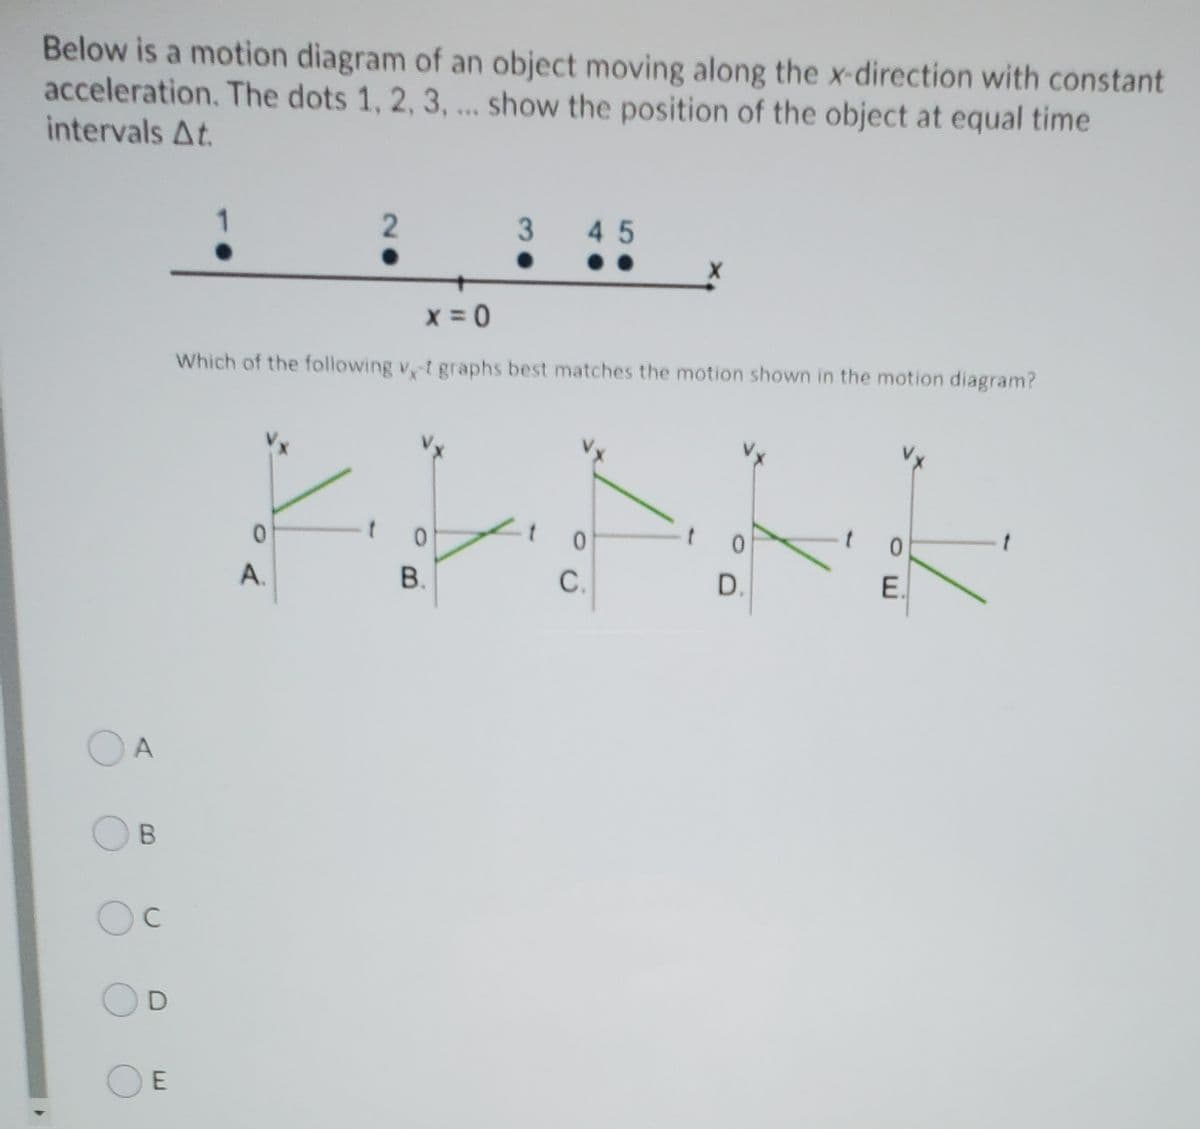 Below is a motion diagram of an object moving along the x-direction with constant
acceleration. The dots 1, 2, 3, .. show the position of the object at equal time
intervals At.
1
2.
3 45
..
Which of the following v, t graphs best matches the motion shown in the motion diagram?
A.
В.
C.
D.
O A
B.
Oc
O E
OE
